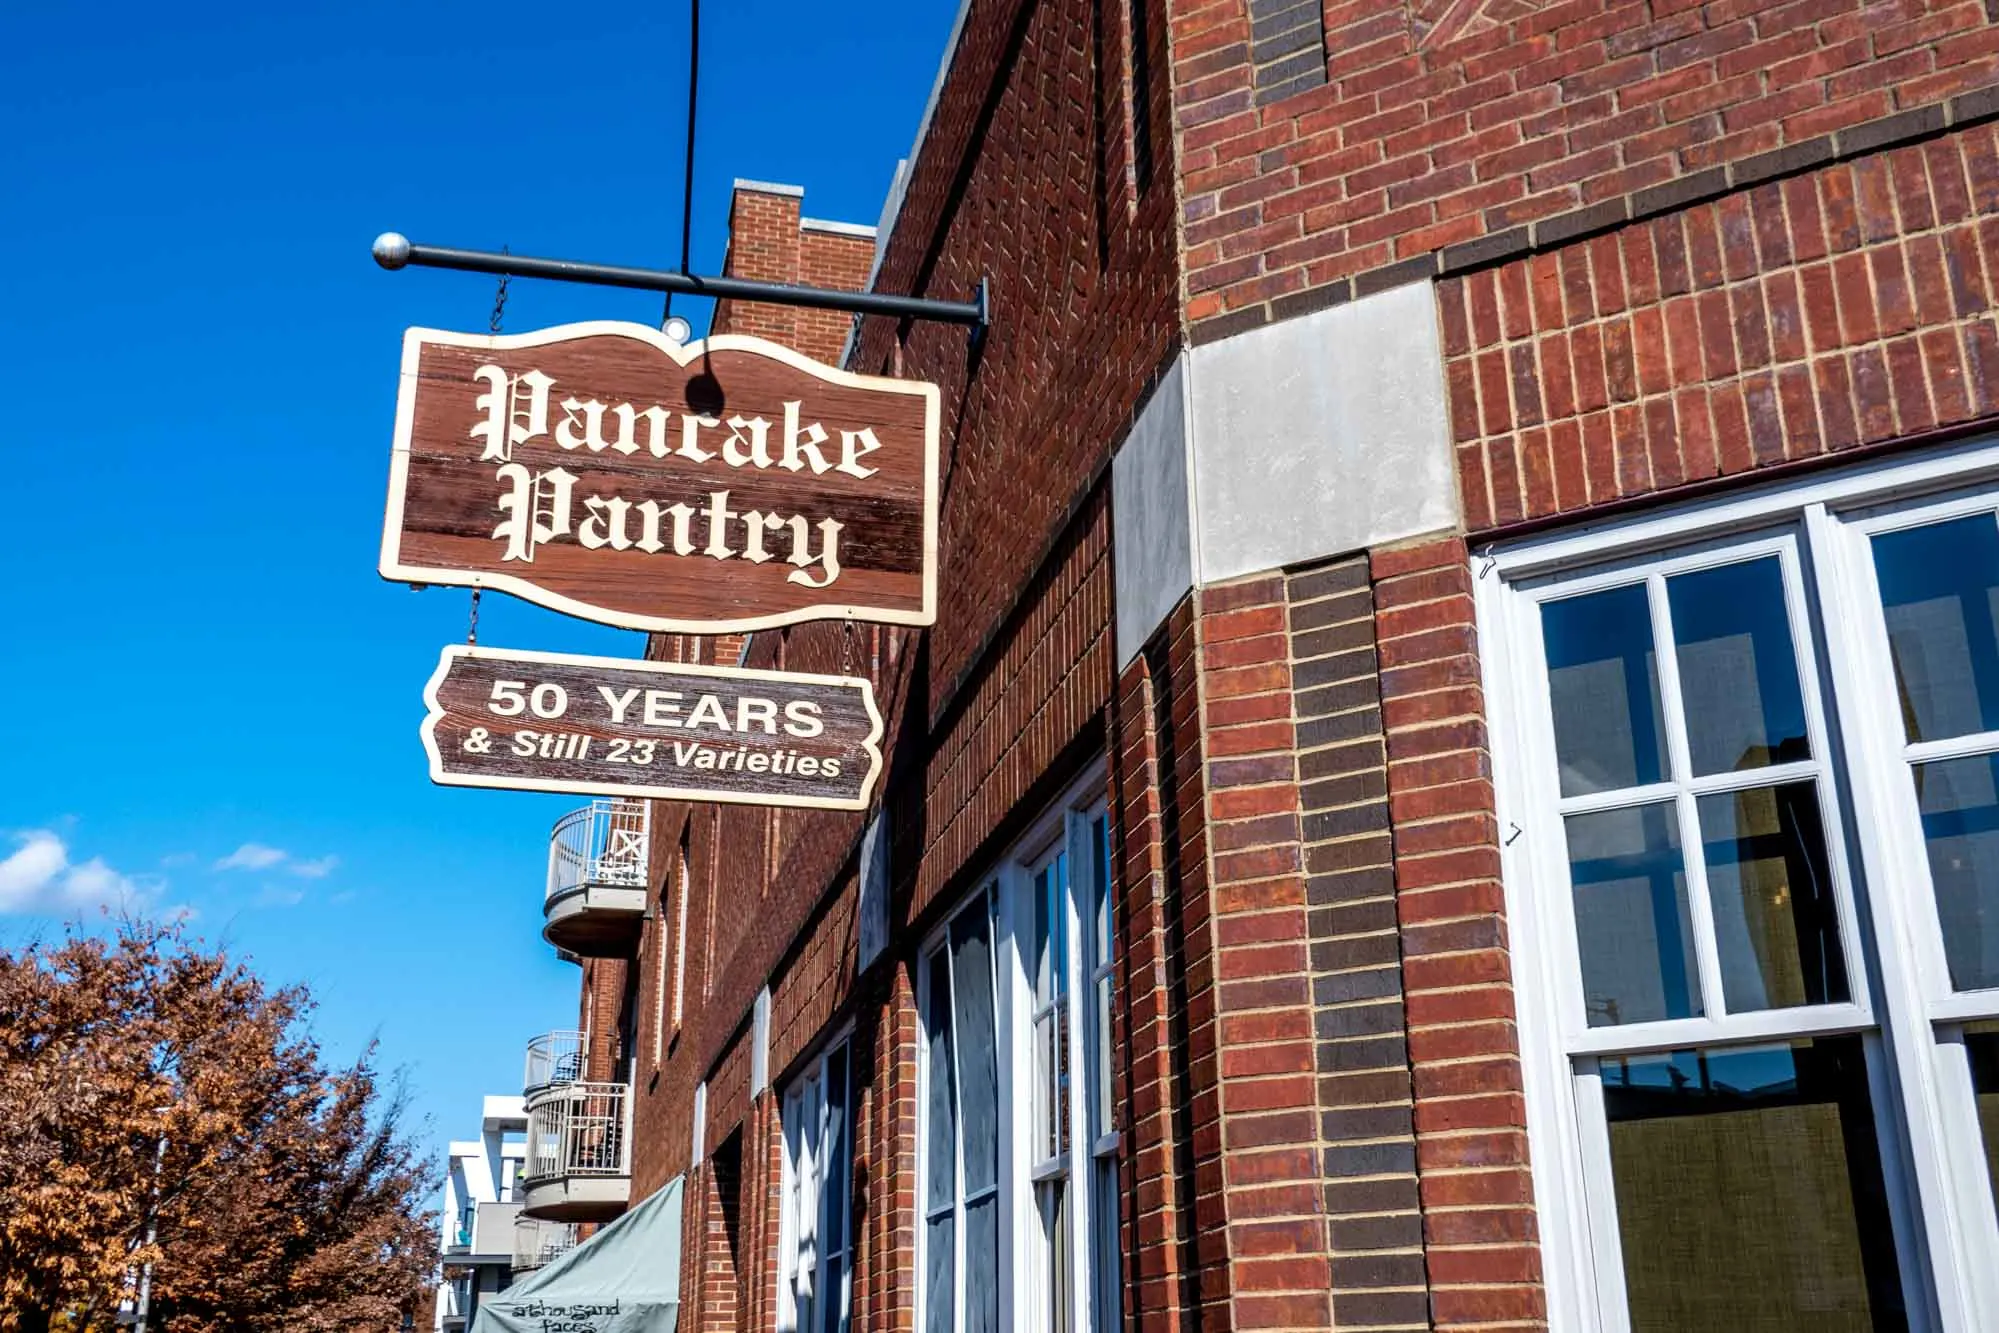 Sign outside a brick building: Pancake Pantry, 50 Years & Still 23 Varieties